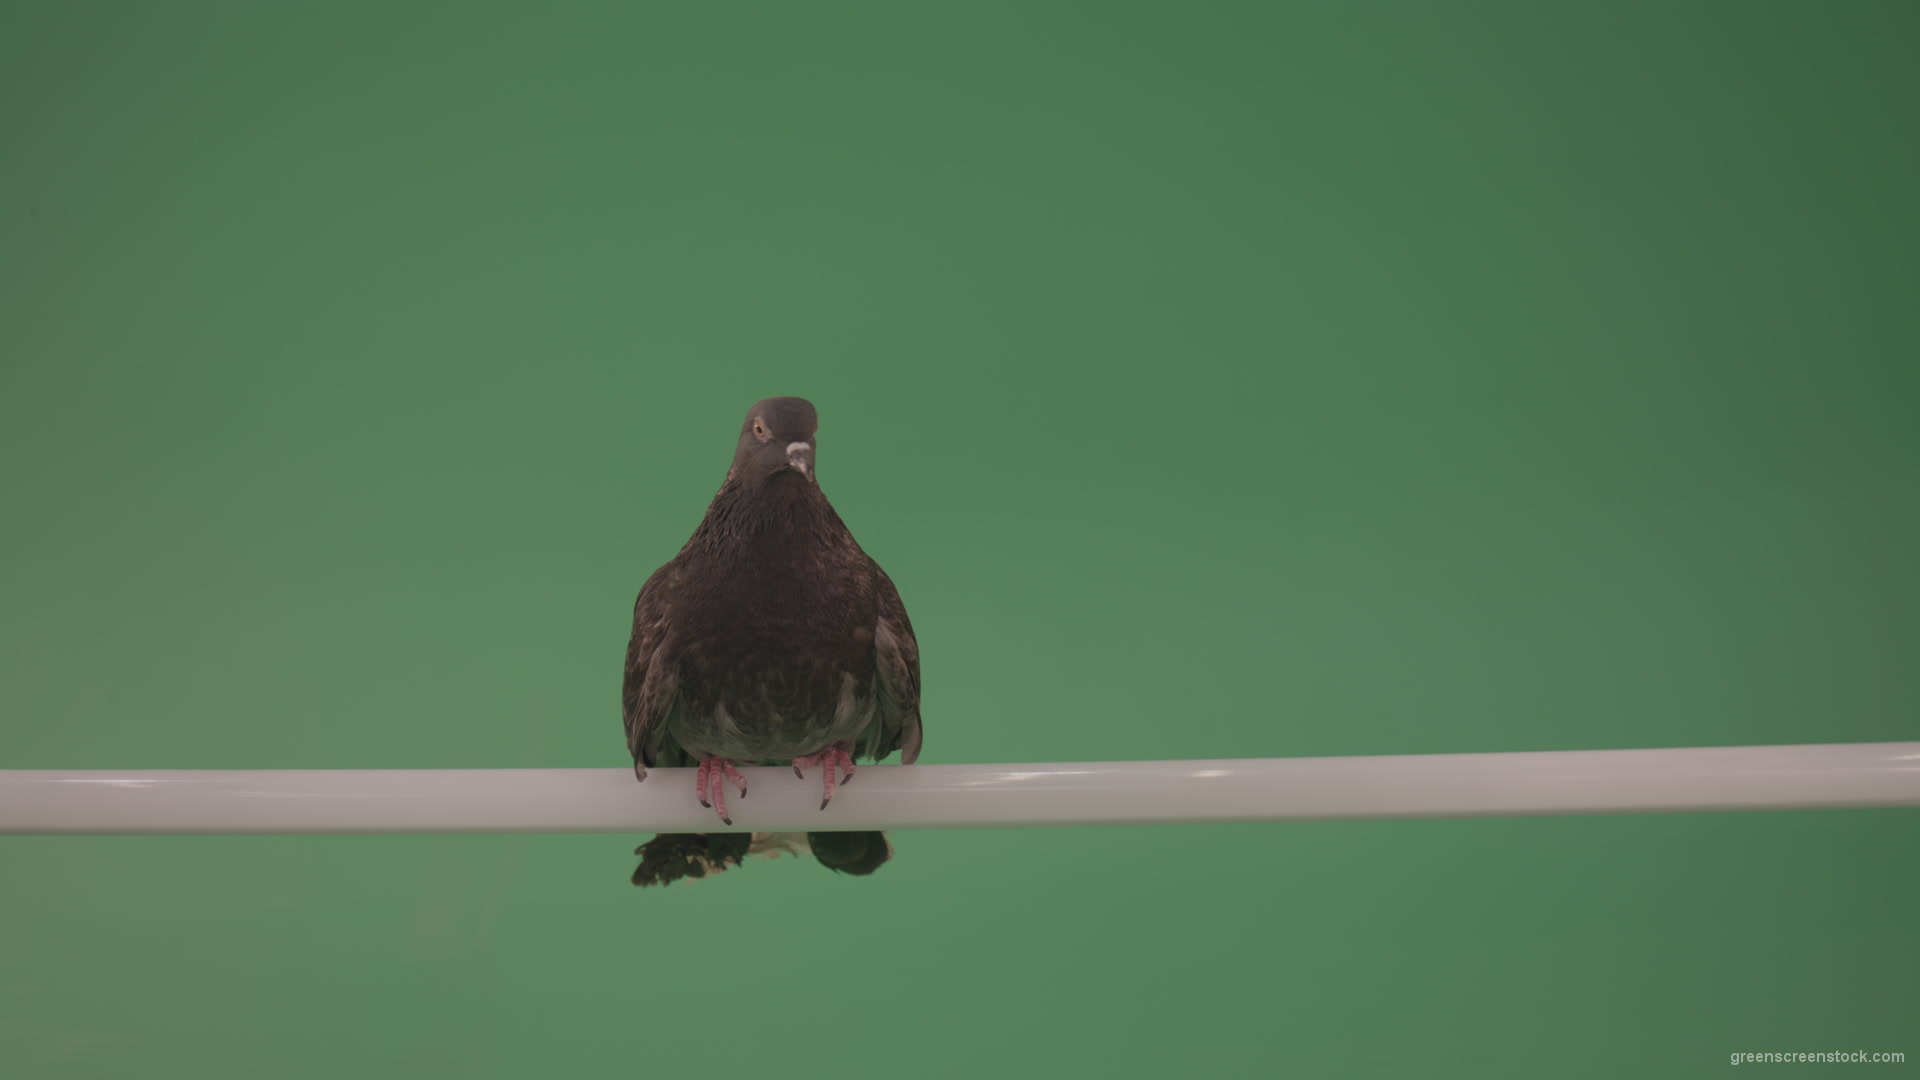 Dove-sitting-on-a-branch-in-the-city-isolated-in-green-screen-studio_008 Green Screen Stock